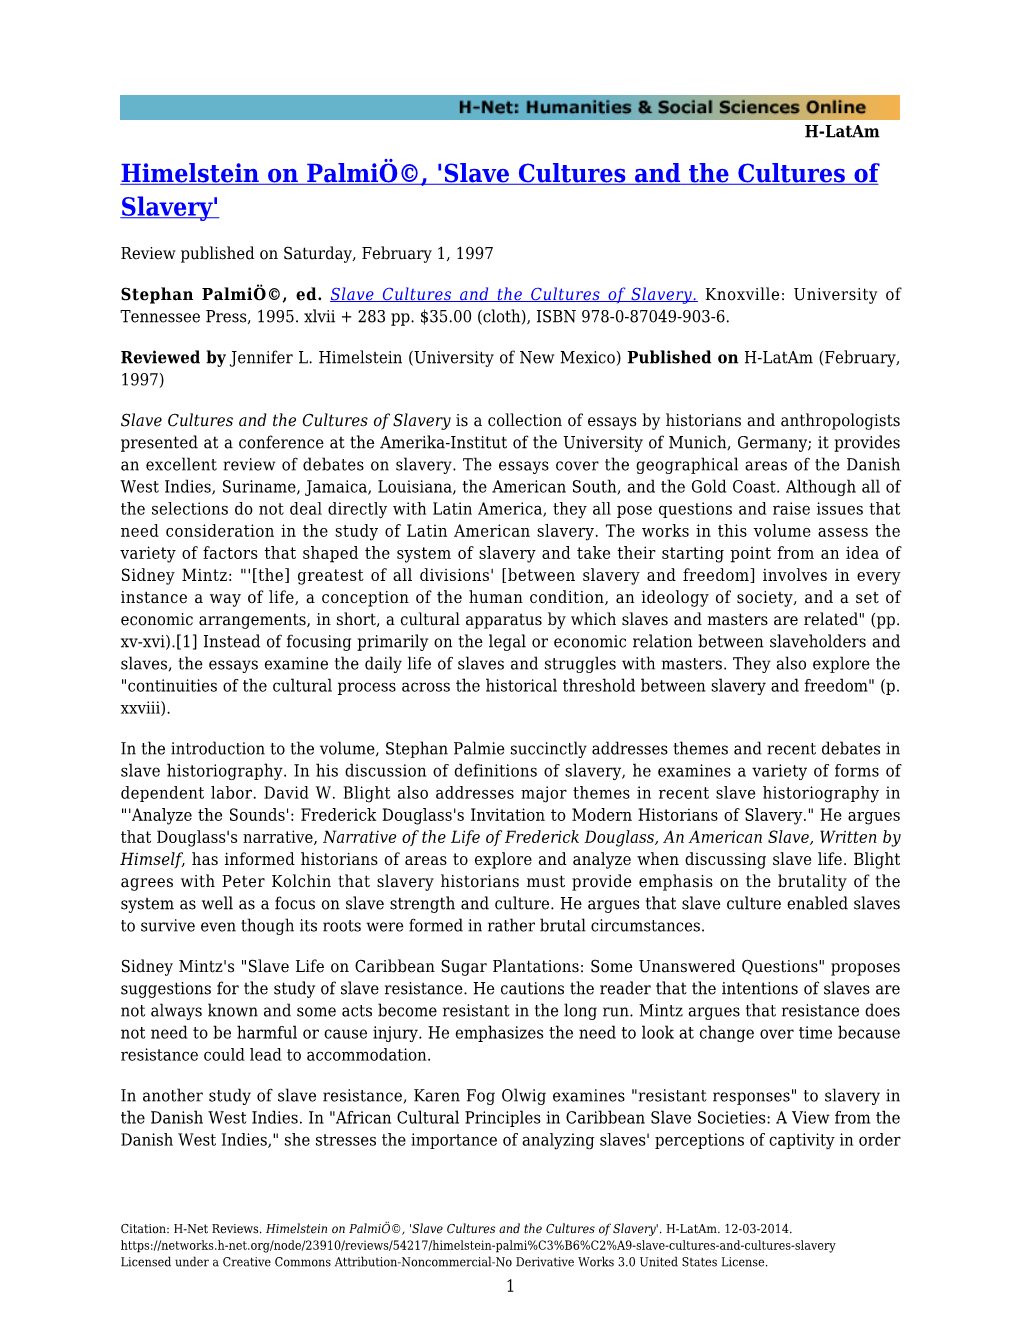 Himelstein on Palmiö©, 'Slave Cultures and the Cultures of Slavery'